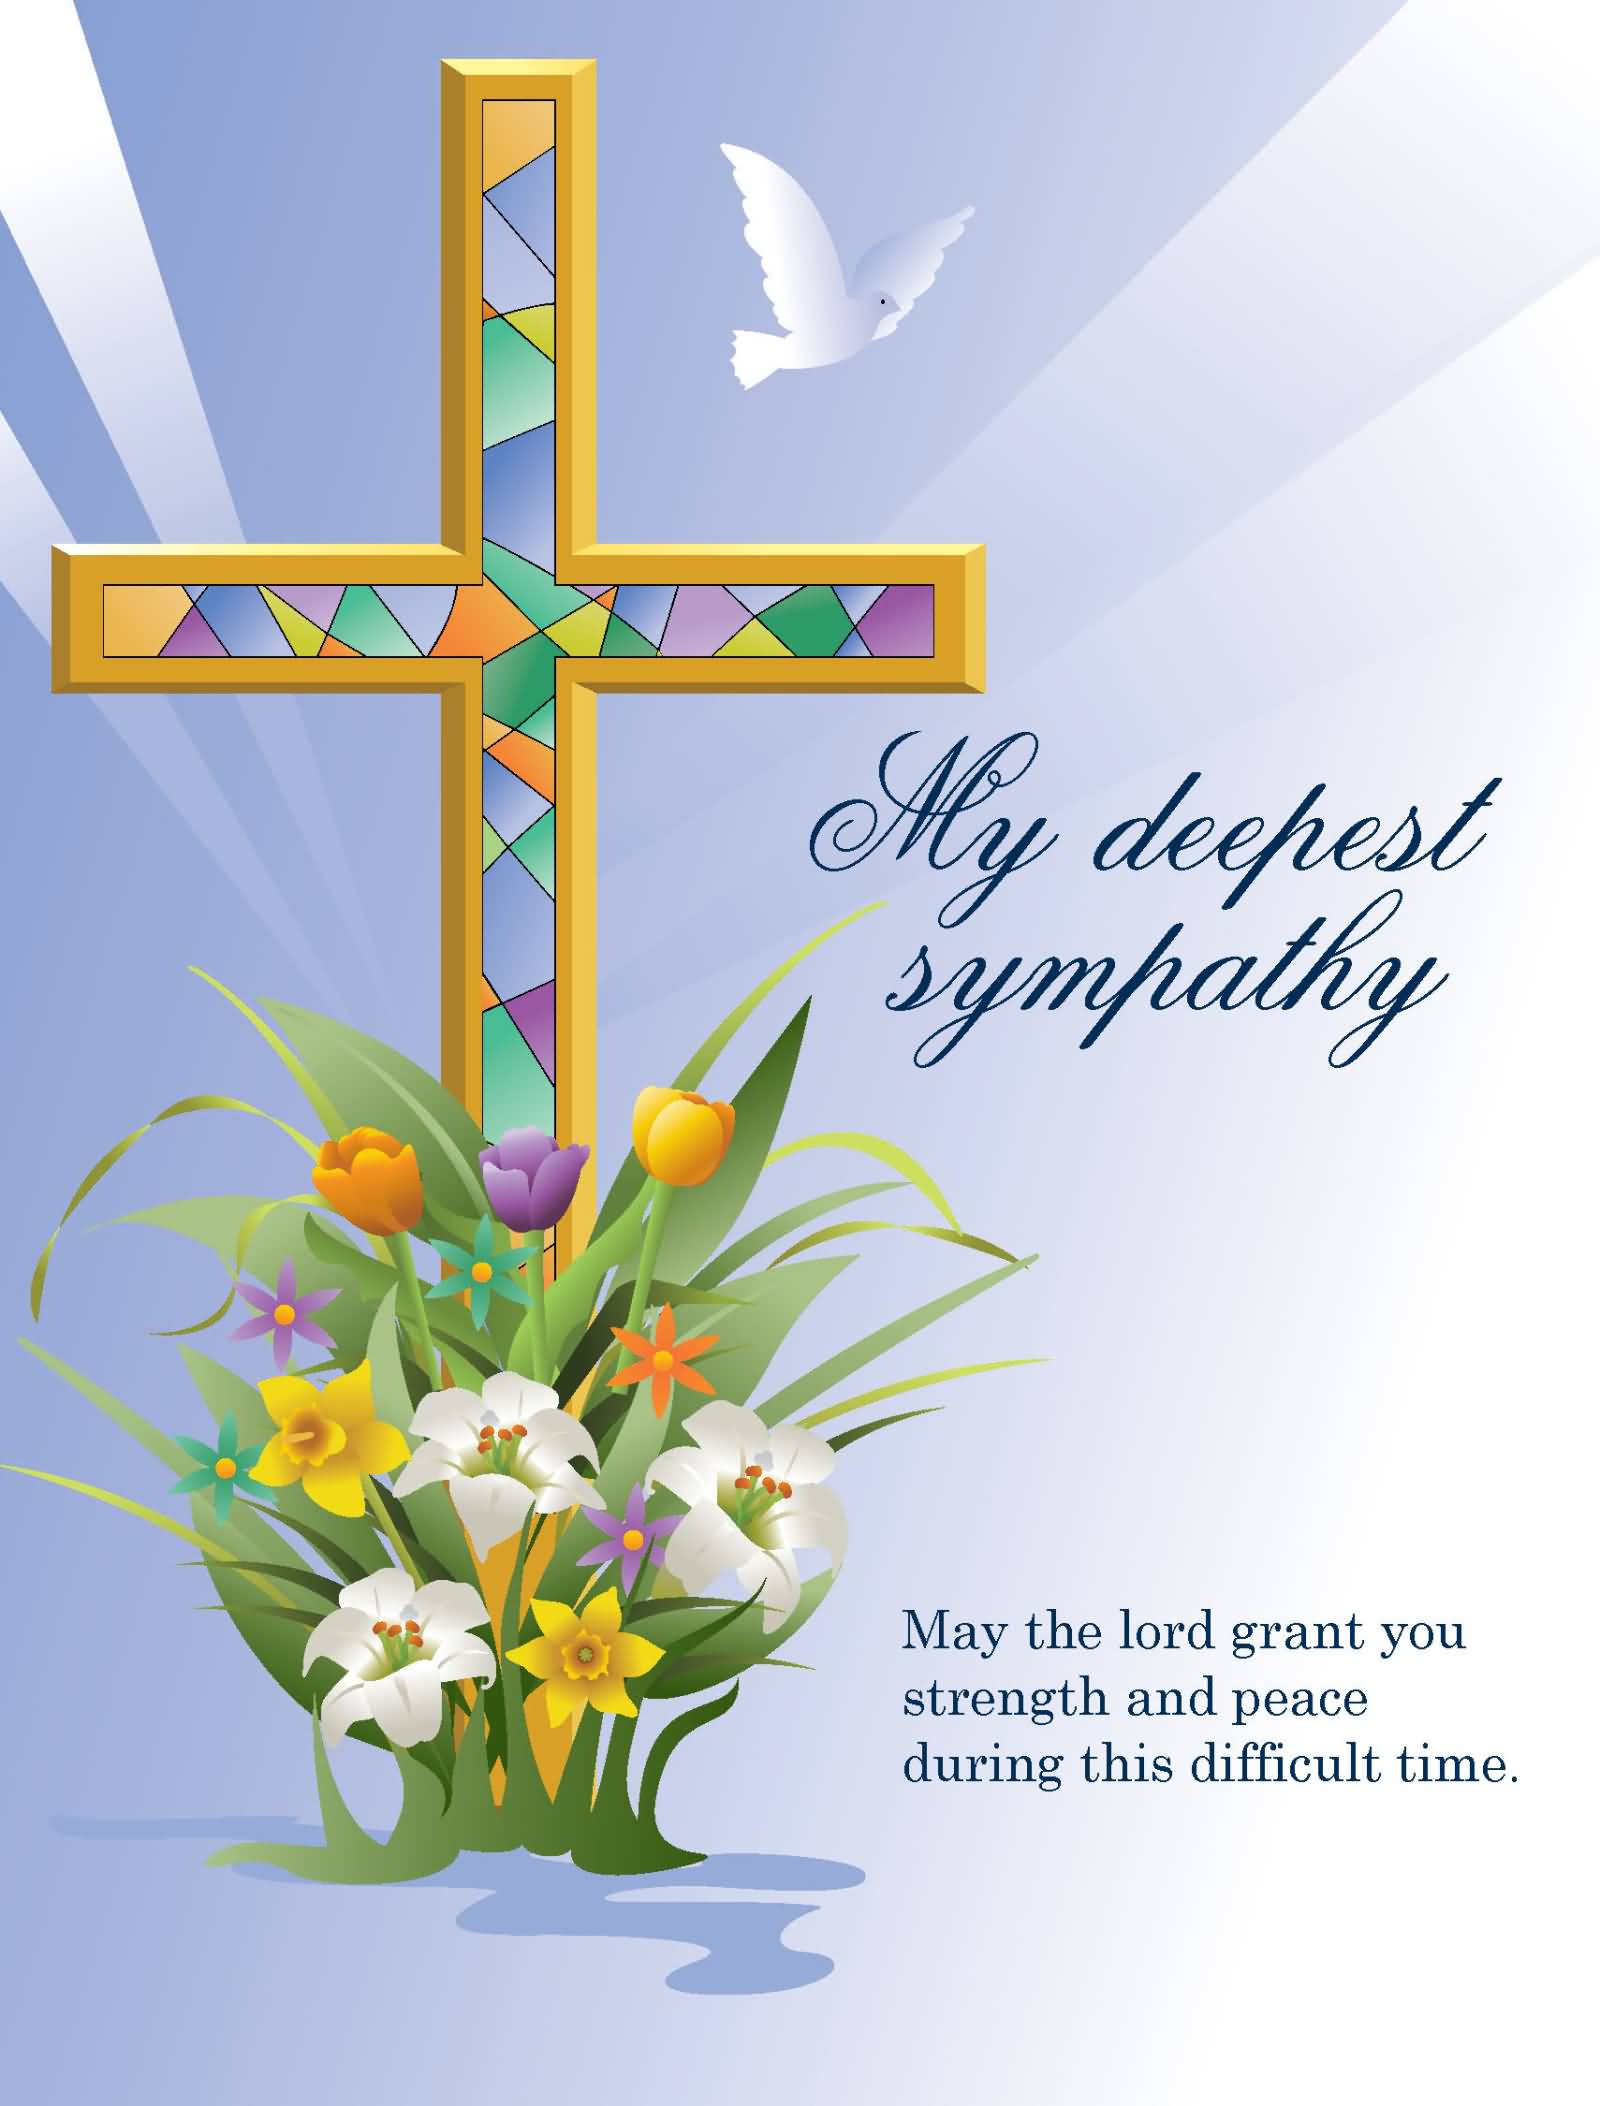 My Deepest Sympathy May The Lord Grant You Strength And Peace During This Difficult Time